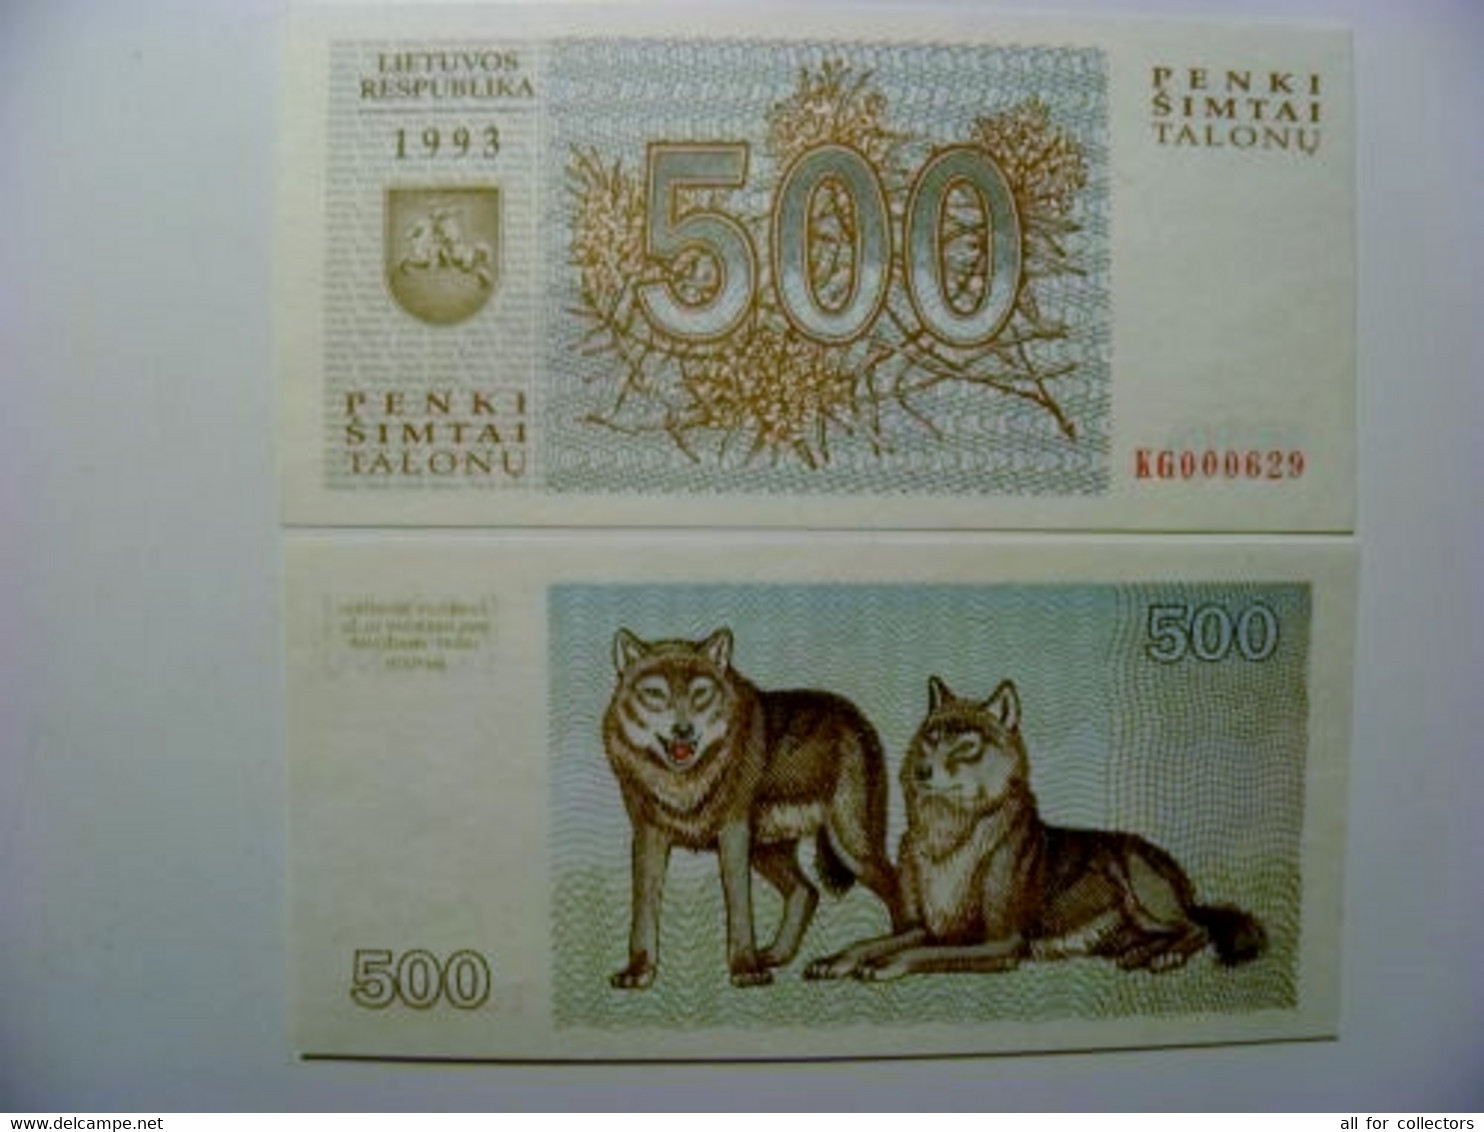 Sale! UNC Banknote Lithuania 500 Talonas 1993 Animals Wolves Wolf - Lithuania